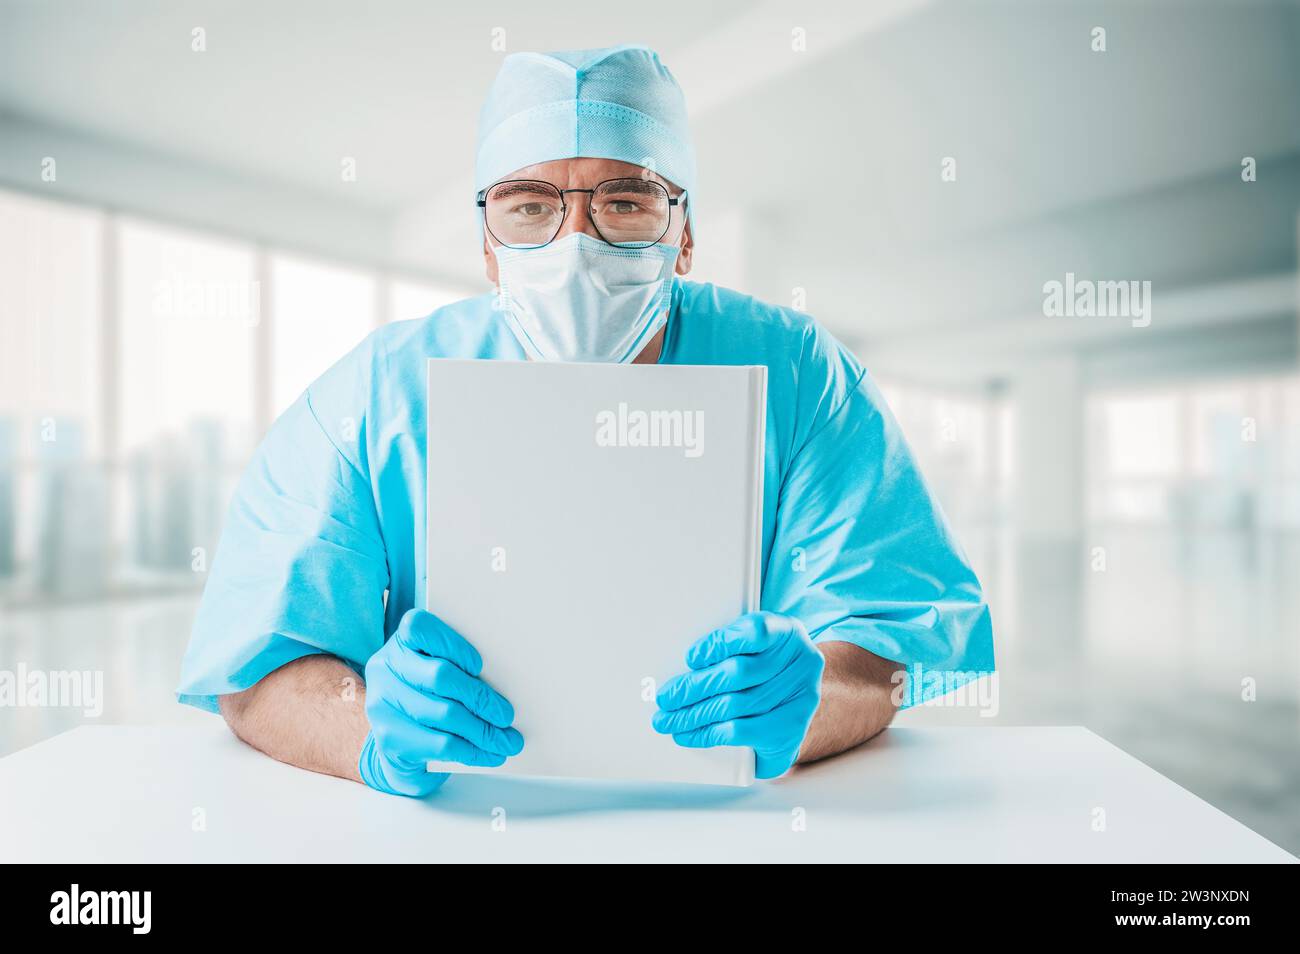 The doctor is holding a white reference book in front of him. Medicine concept. Mixed media Stock Photo